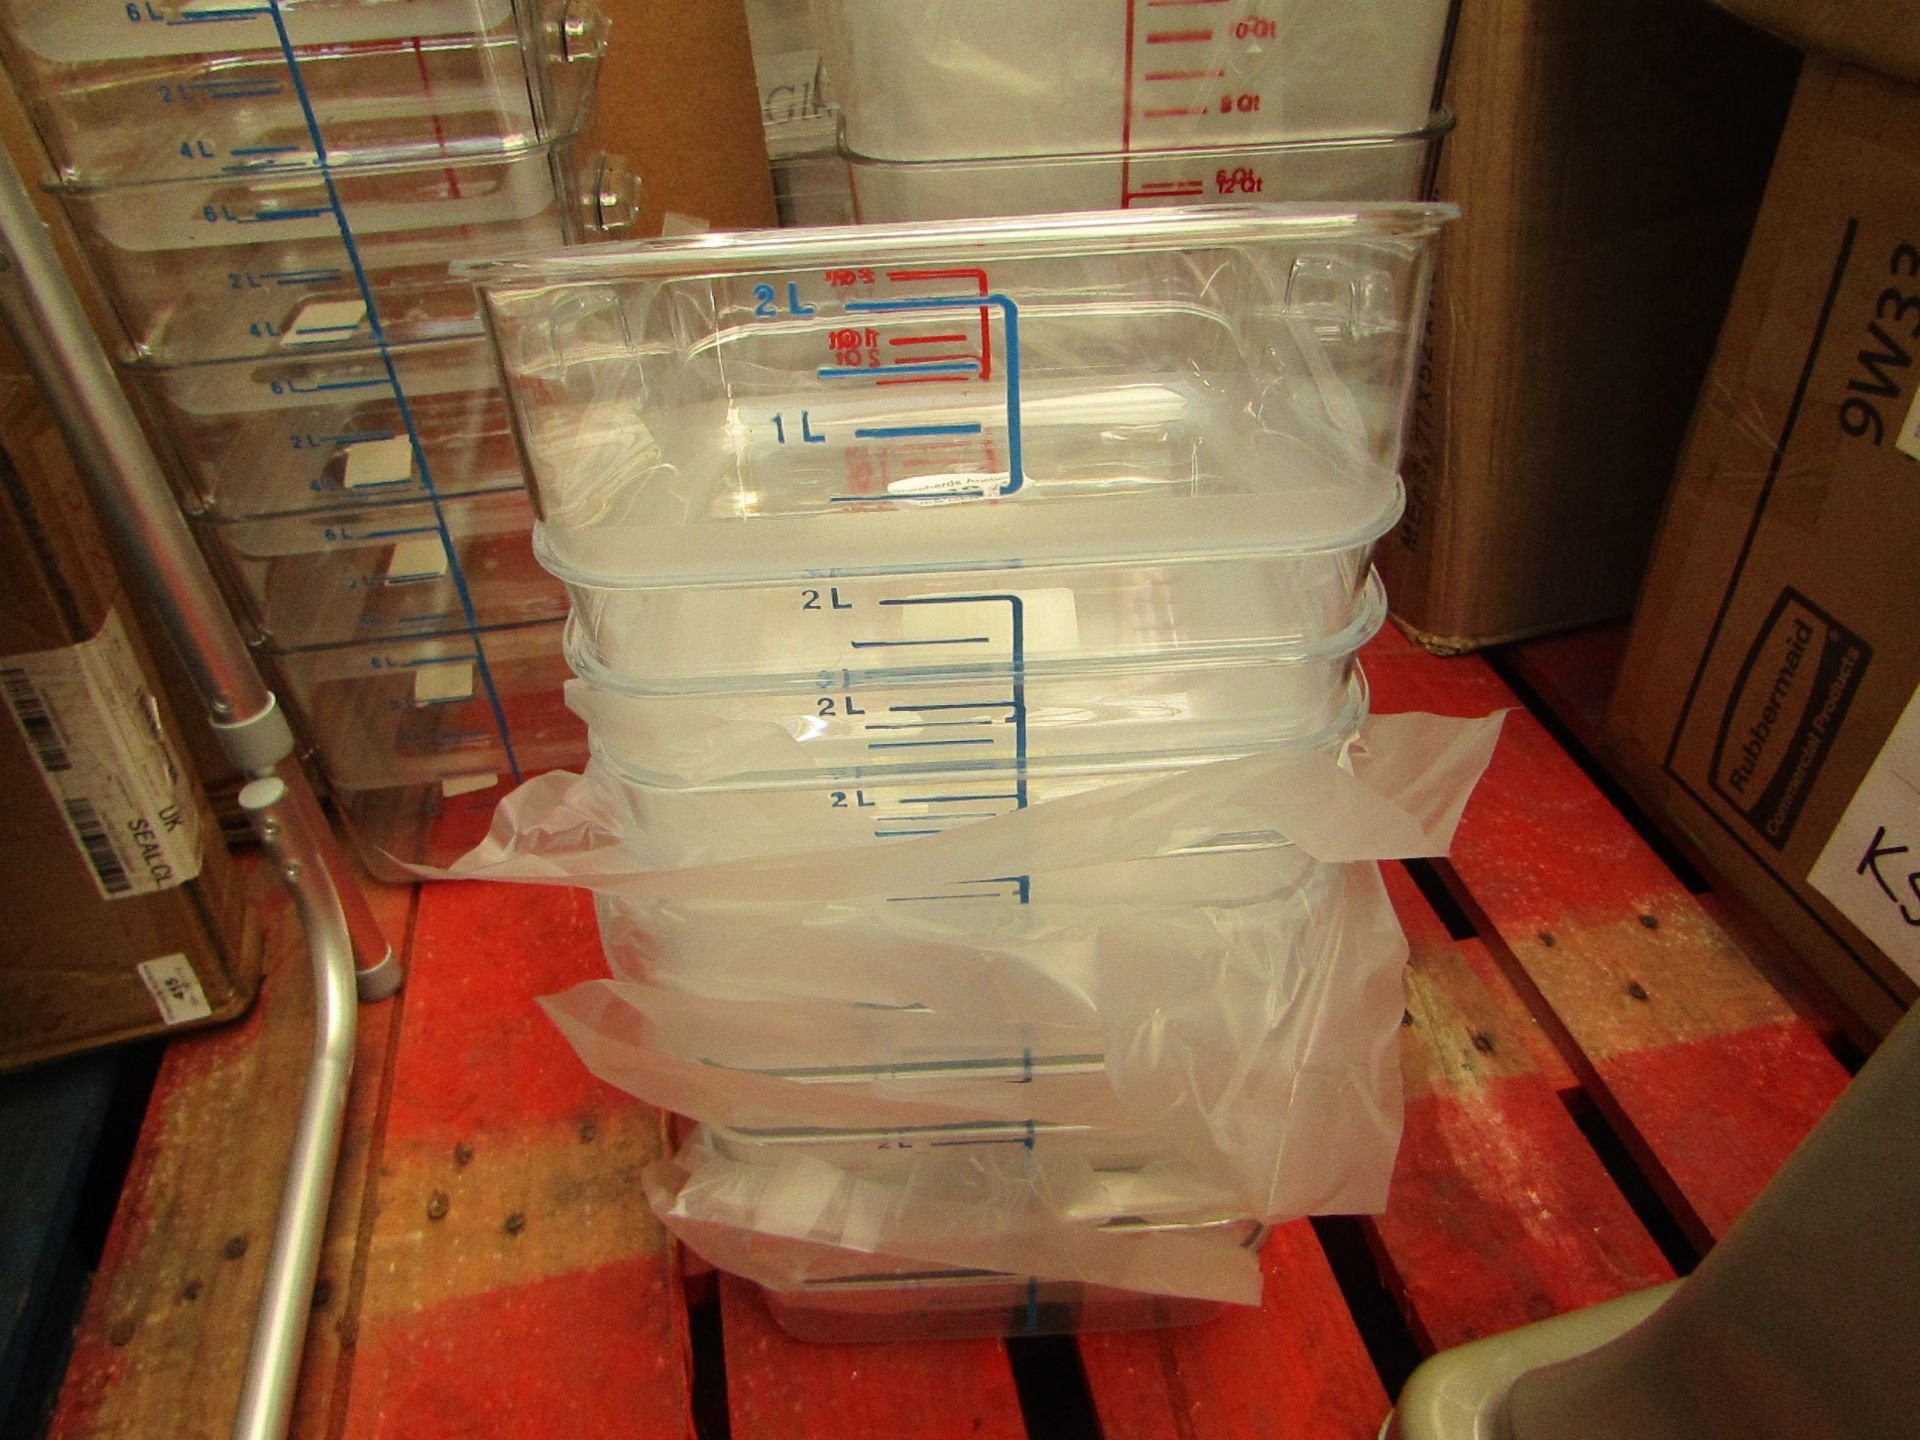 12 x Rubbermaid Perspex Dishes. Holds upto 2L each. New